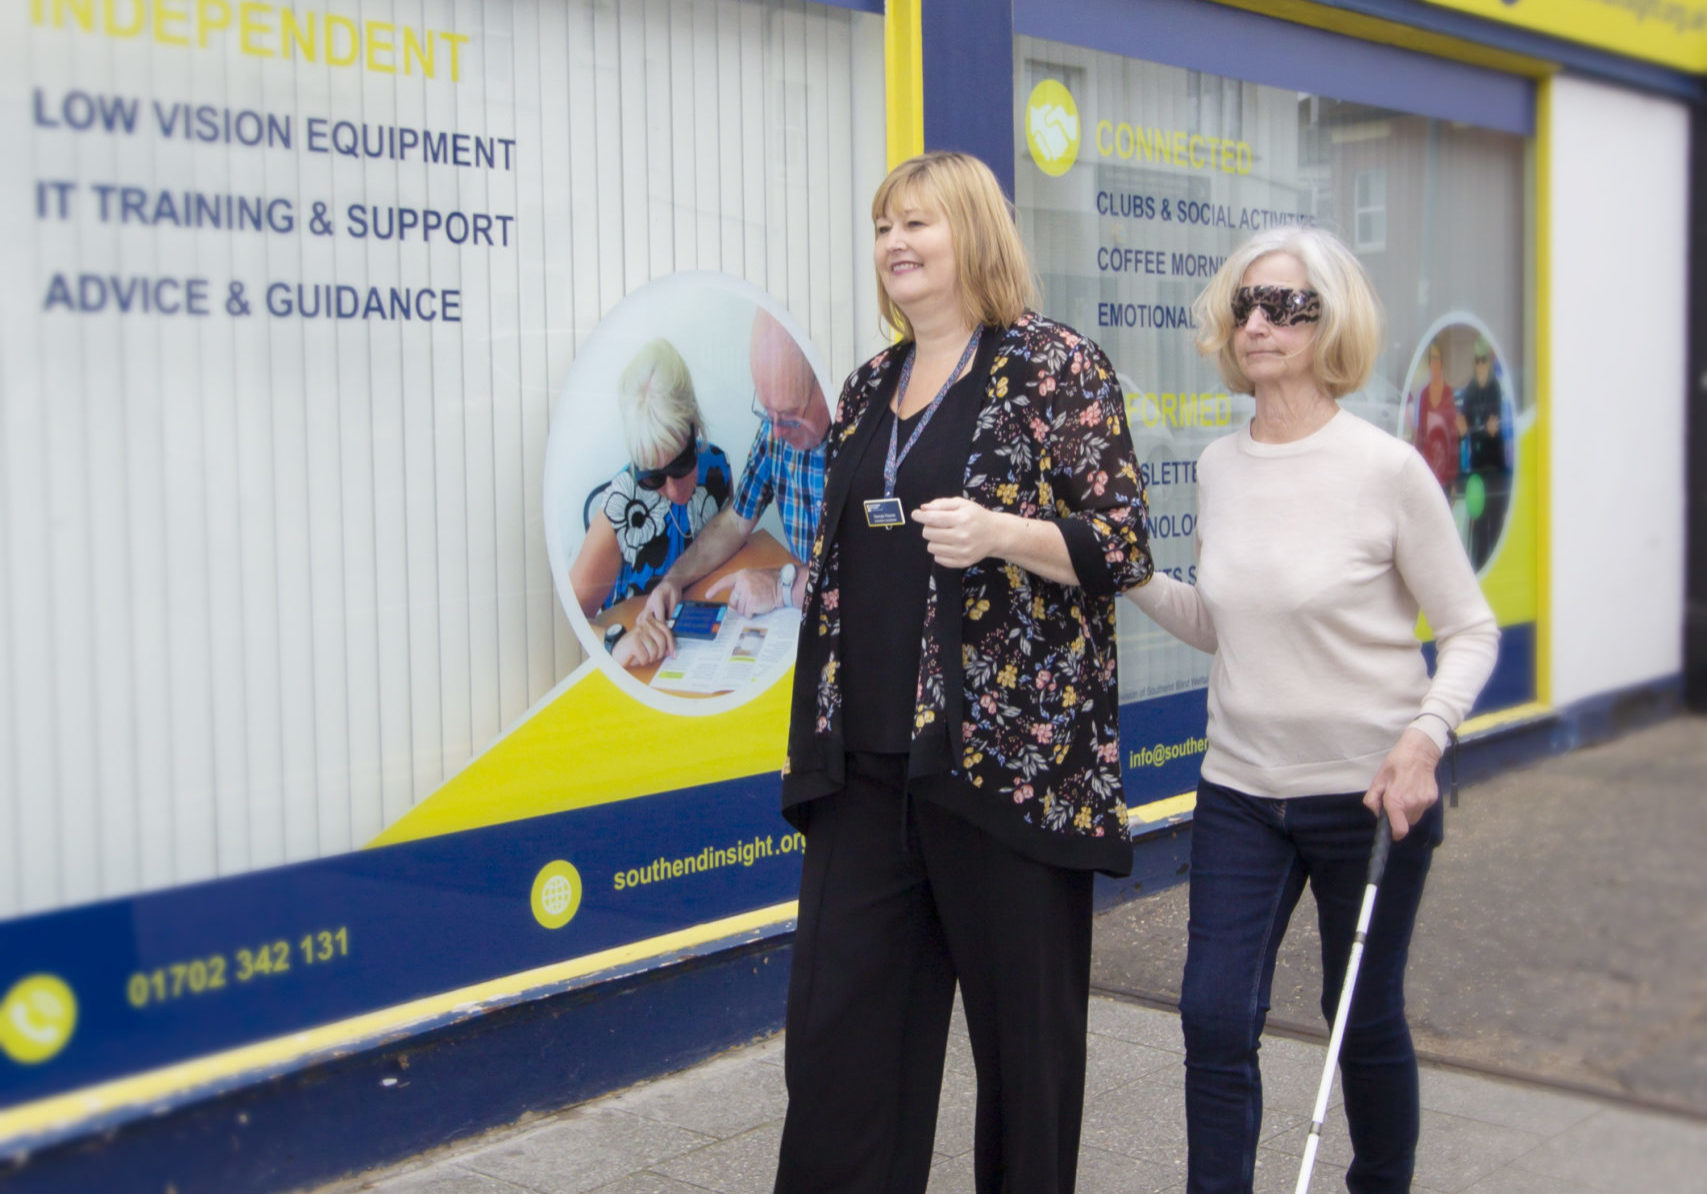 Picture shows sight loss awareness training in action, with a staff member guiding a visually impaired person with a cane.